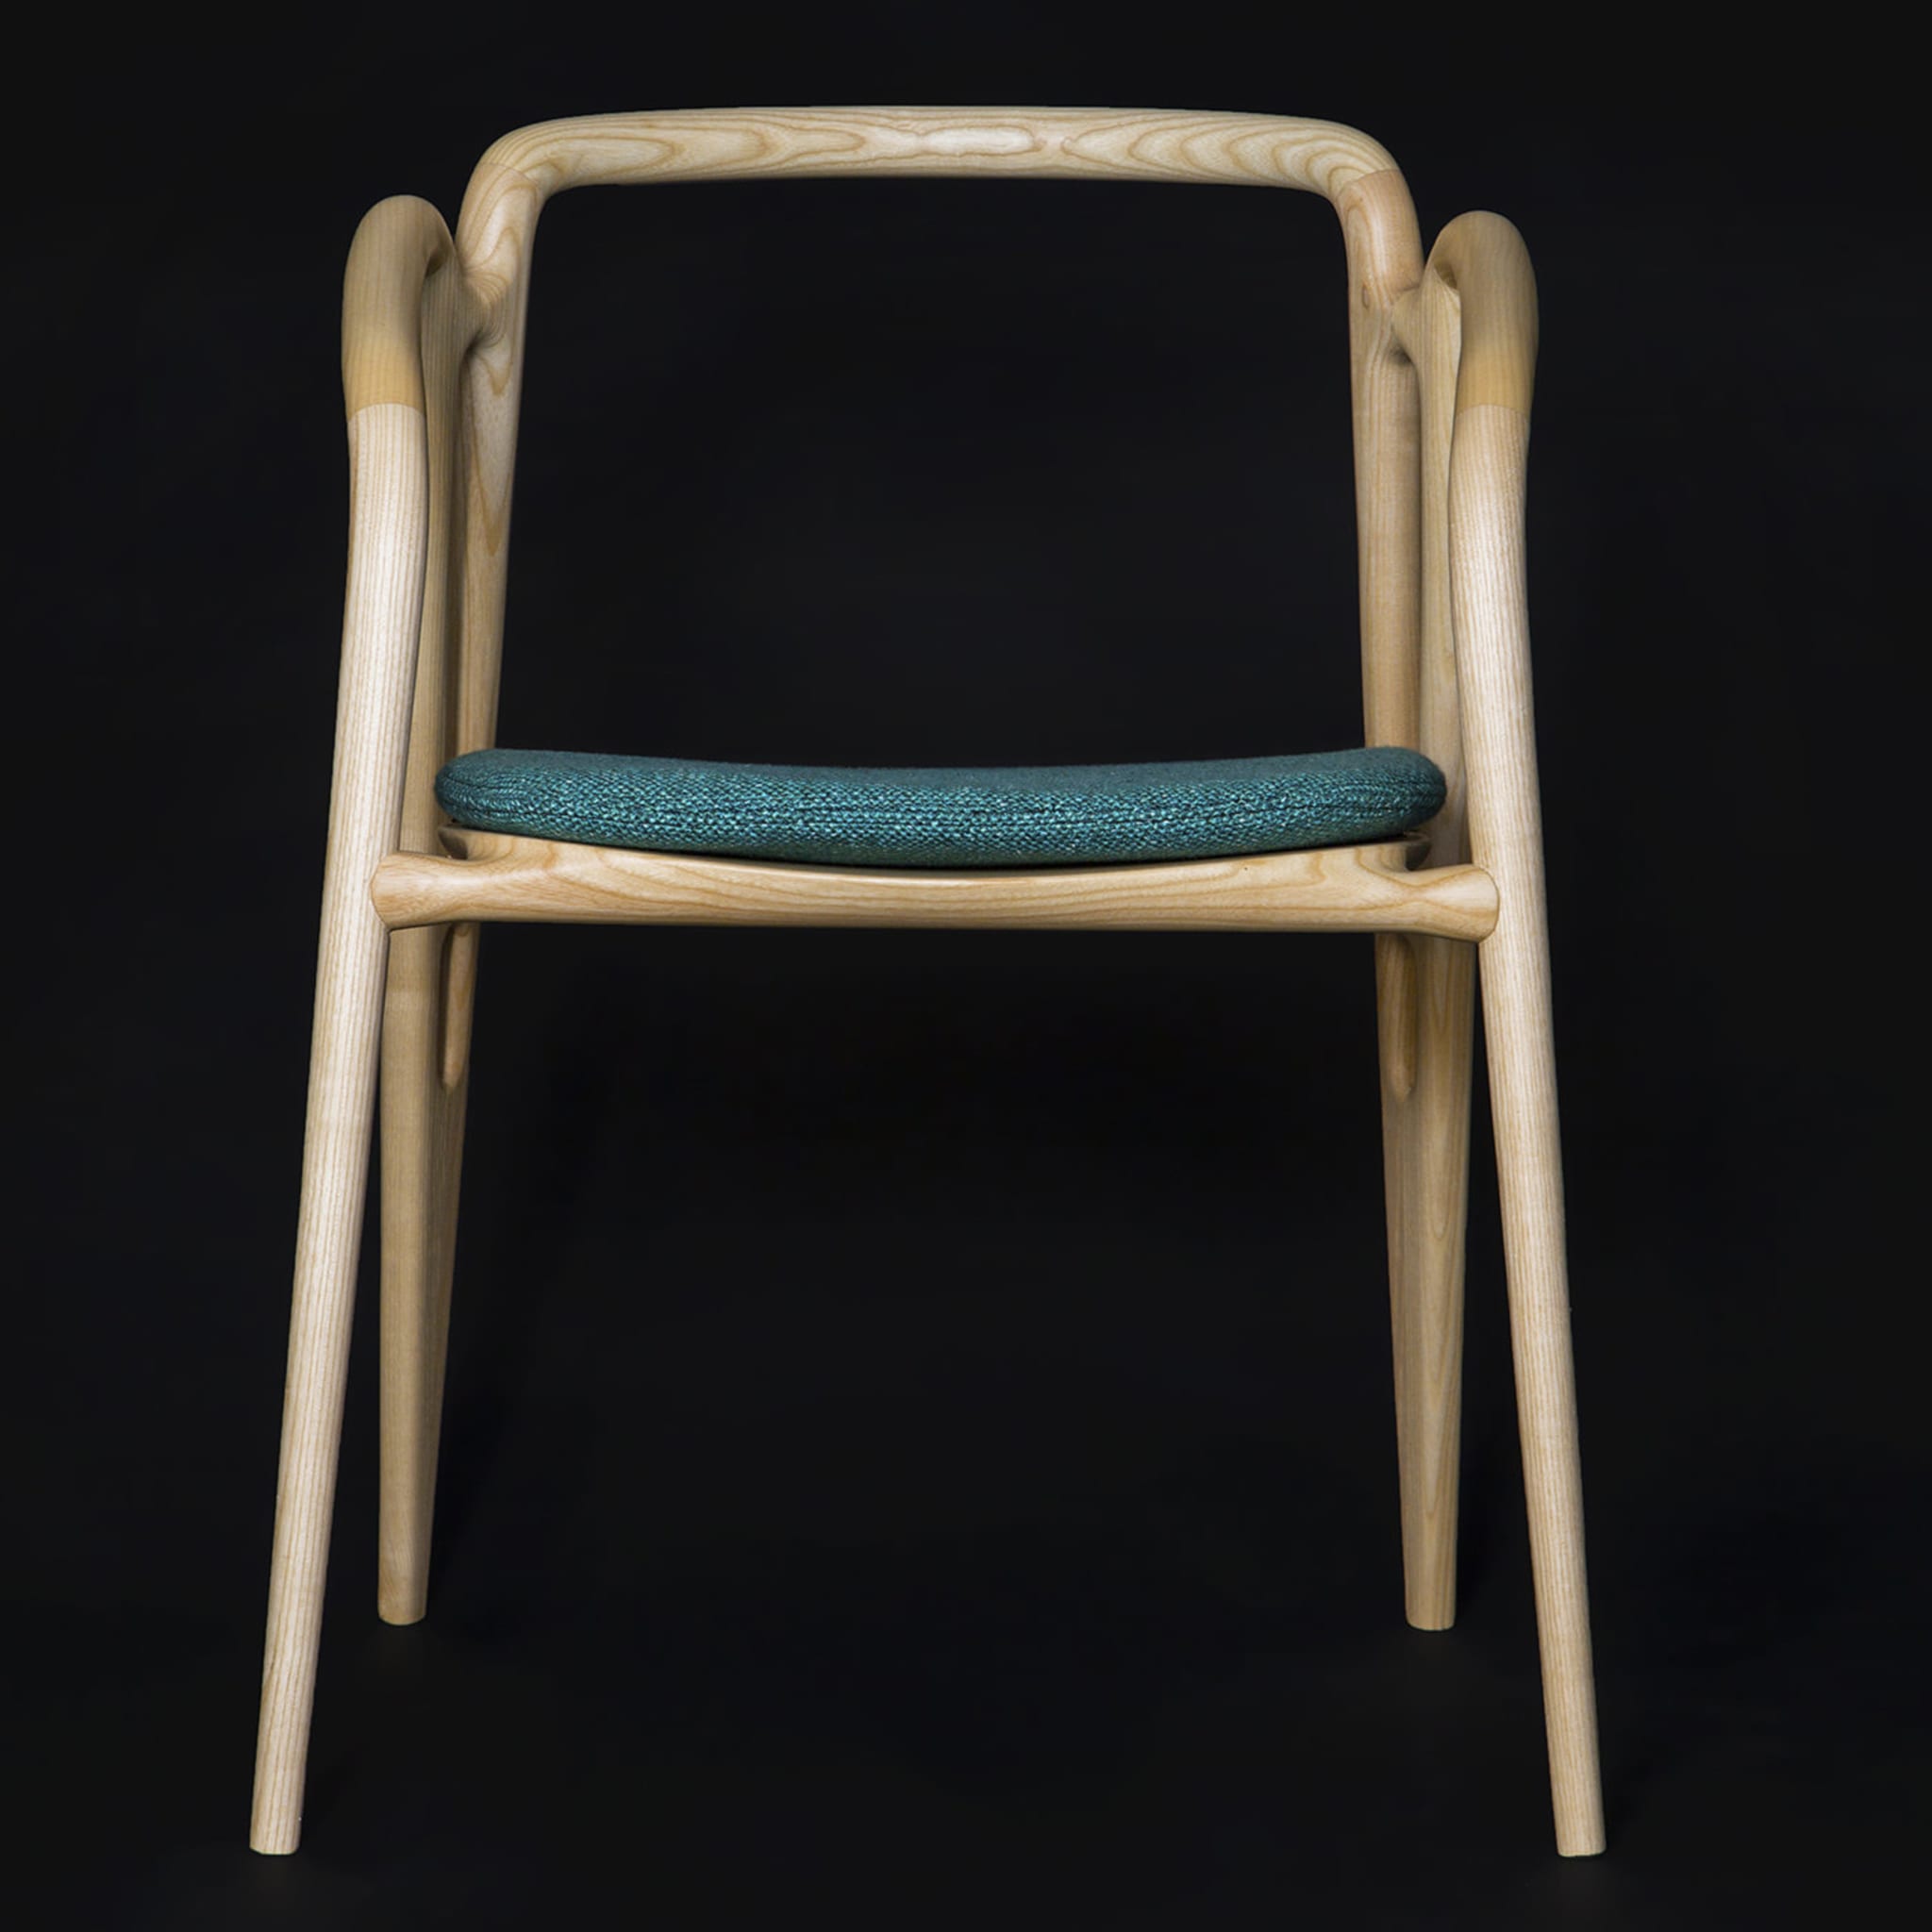 Vivo Chair with Turquoise Cushion - Alternative view 5